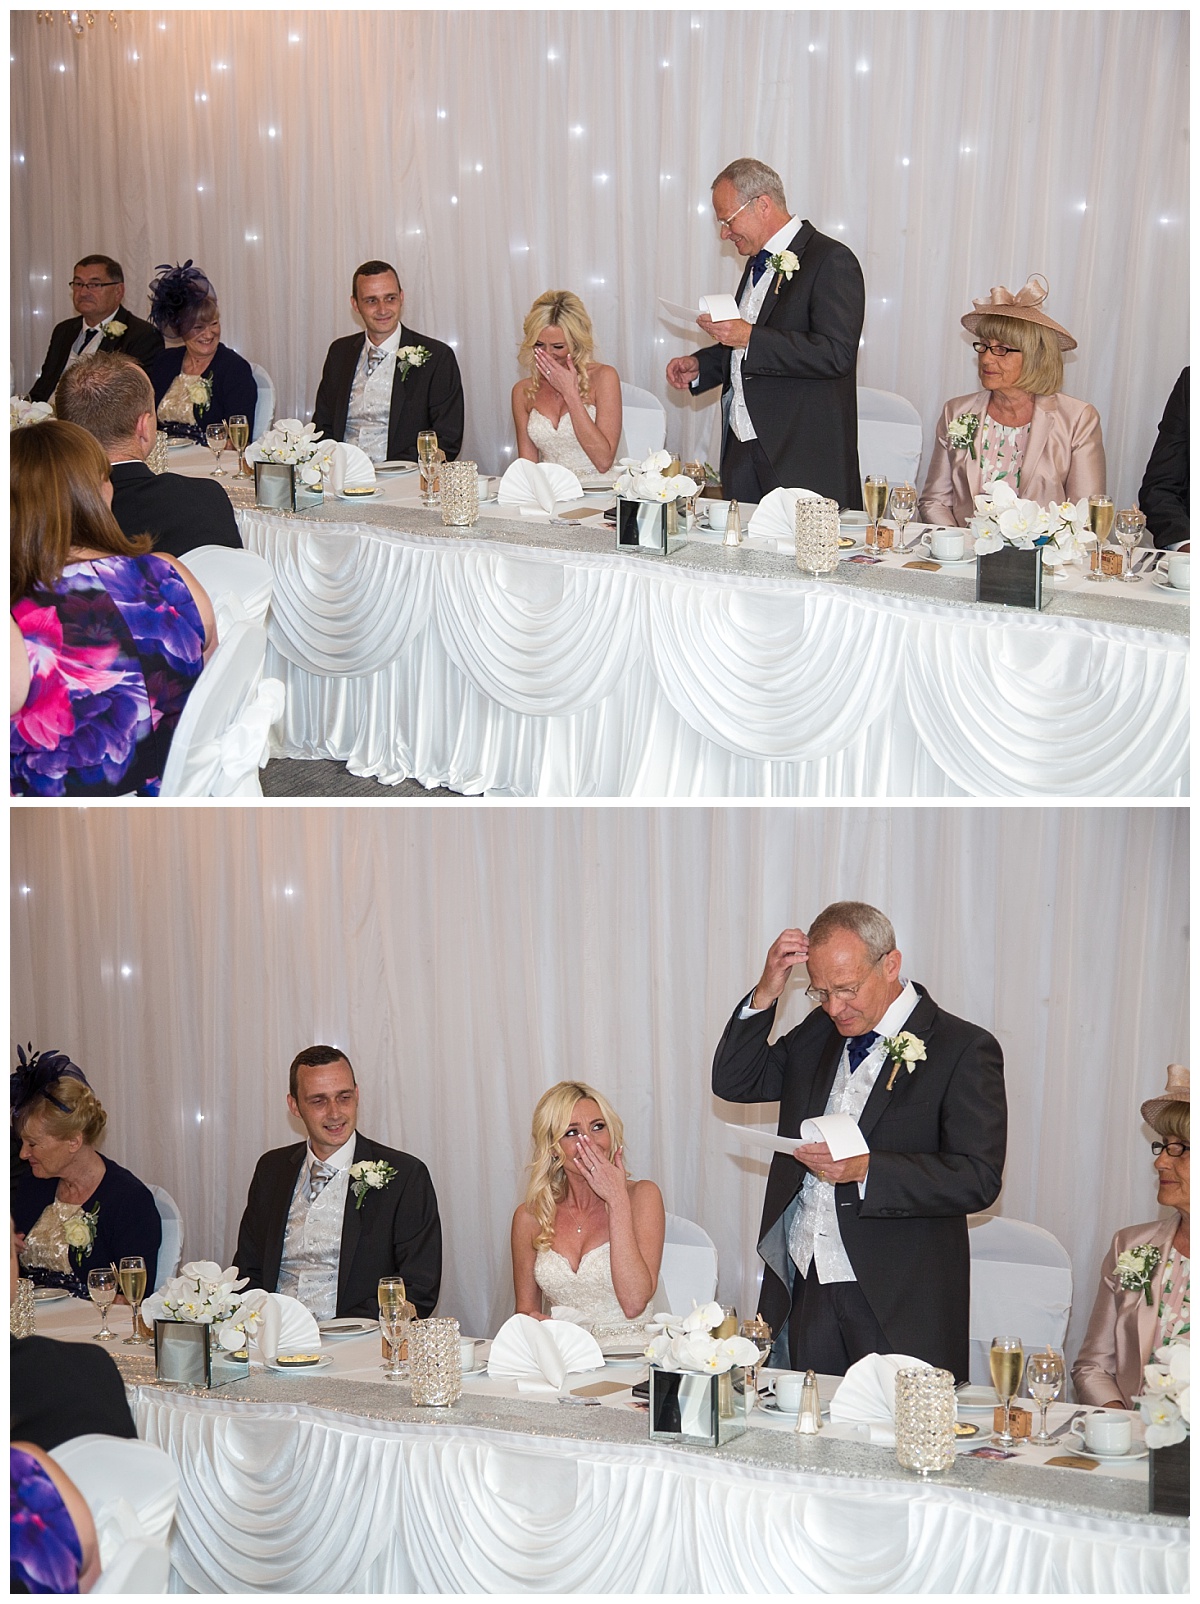 Wedding Photography Manchester - Alex and Andrews Deanwater Hotel wedding 49